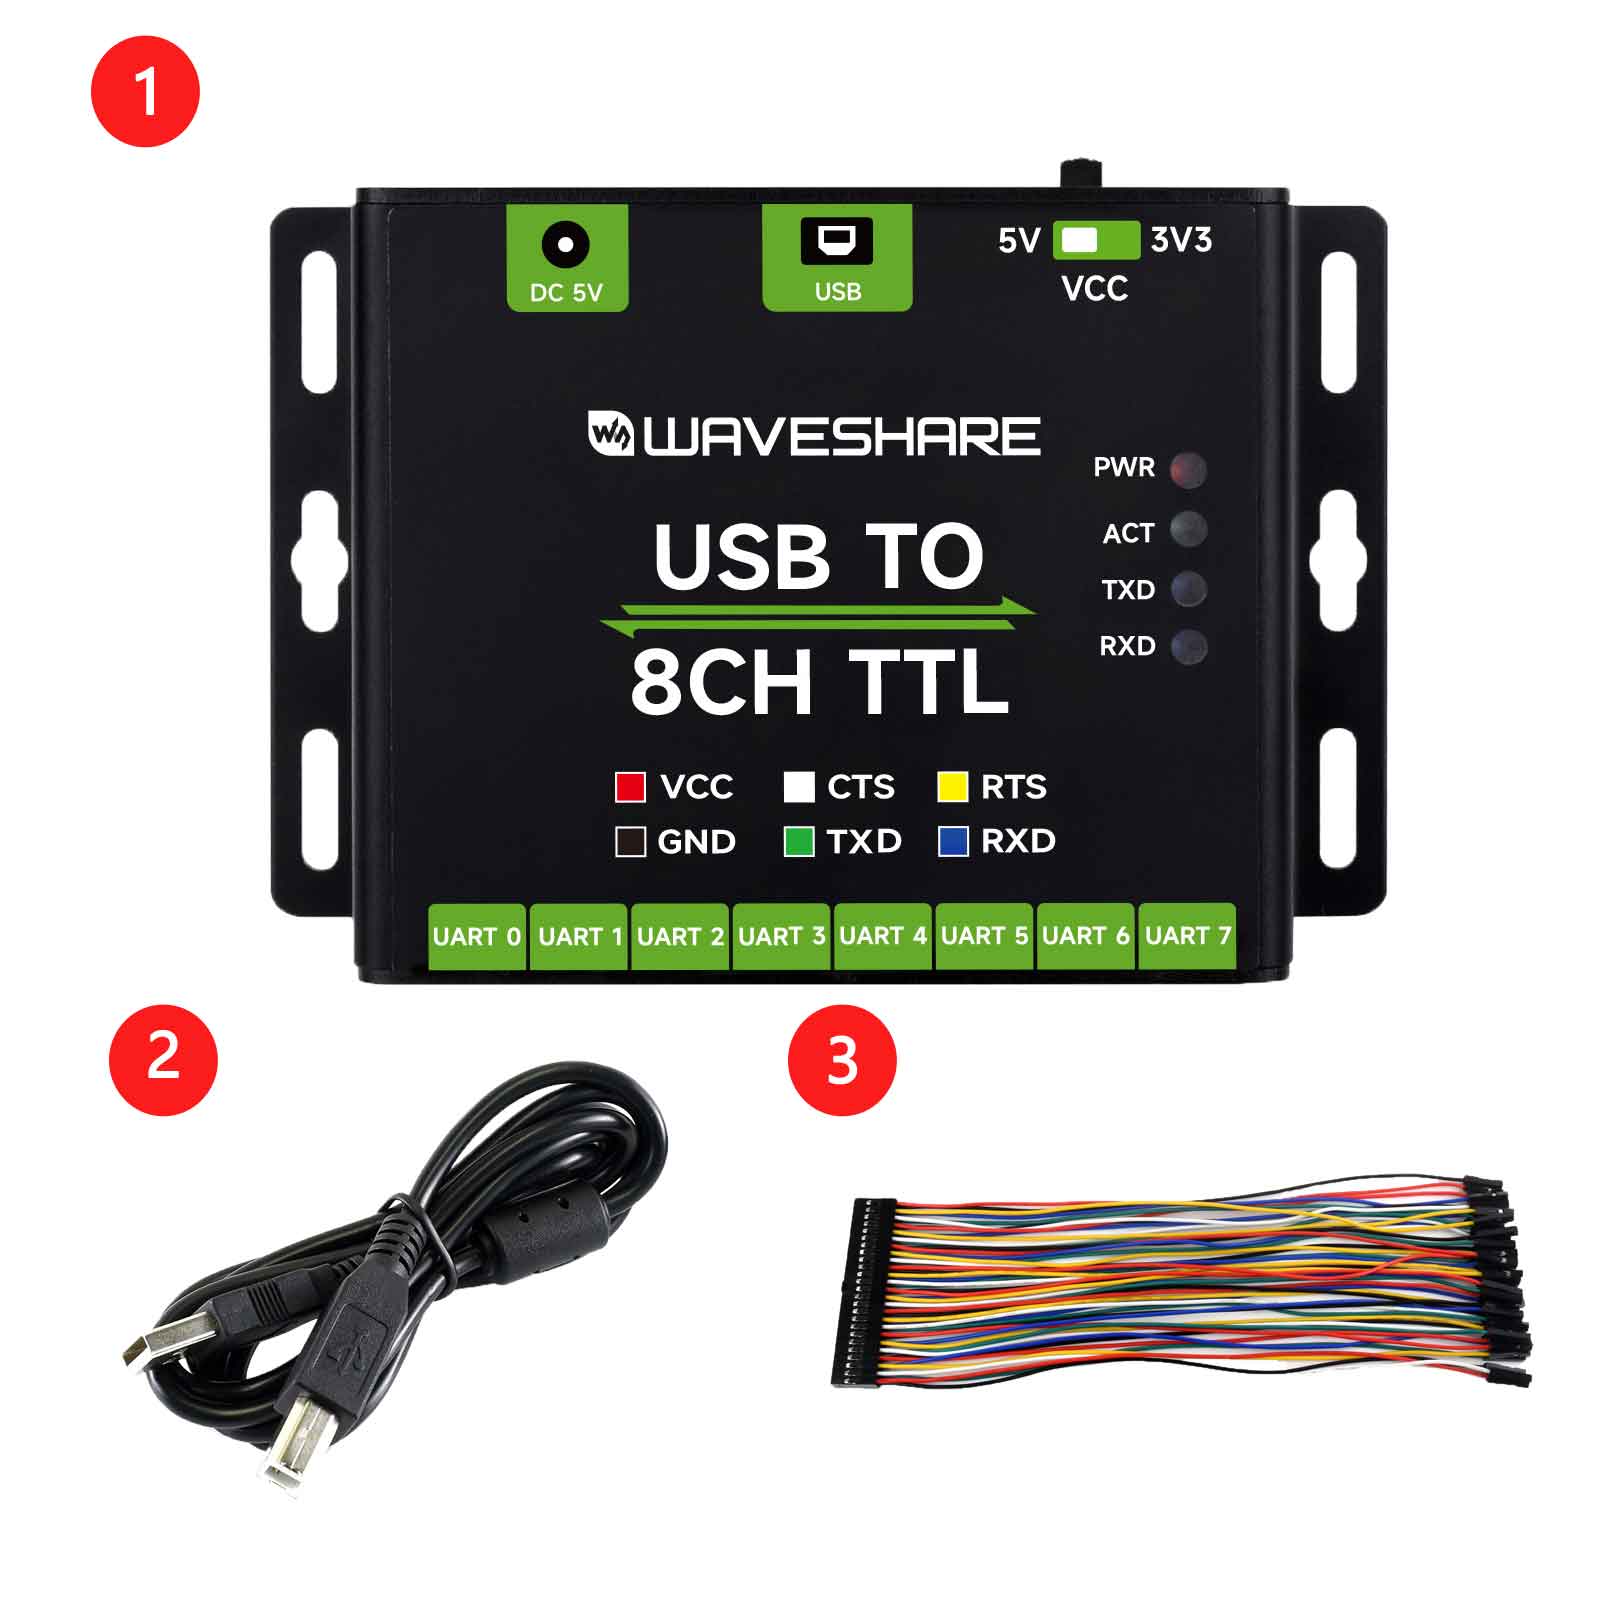 Industrial USB TO 8CH TTL Converter USB to UART Multi Protection Circuits Multi Systems